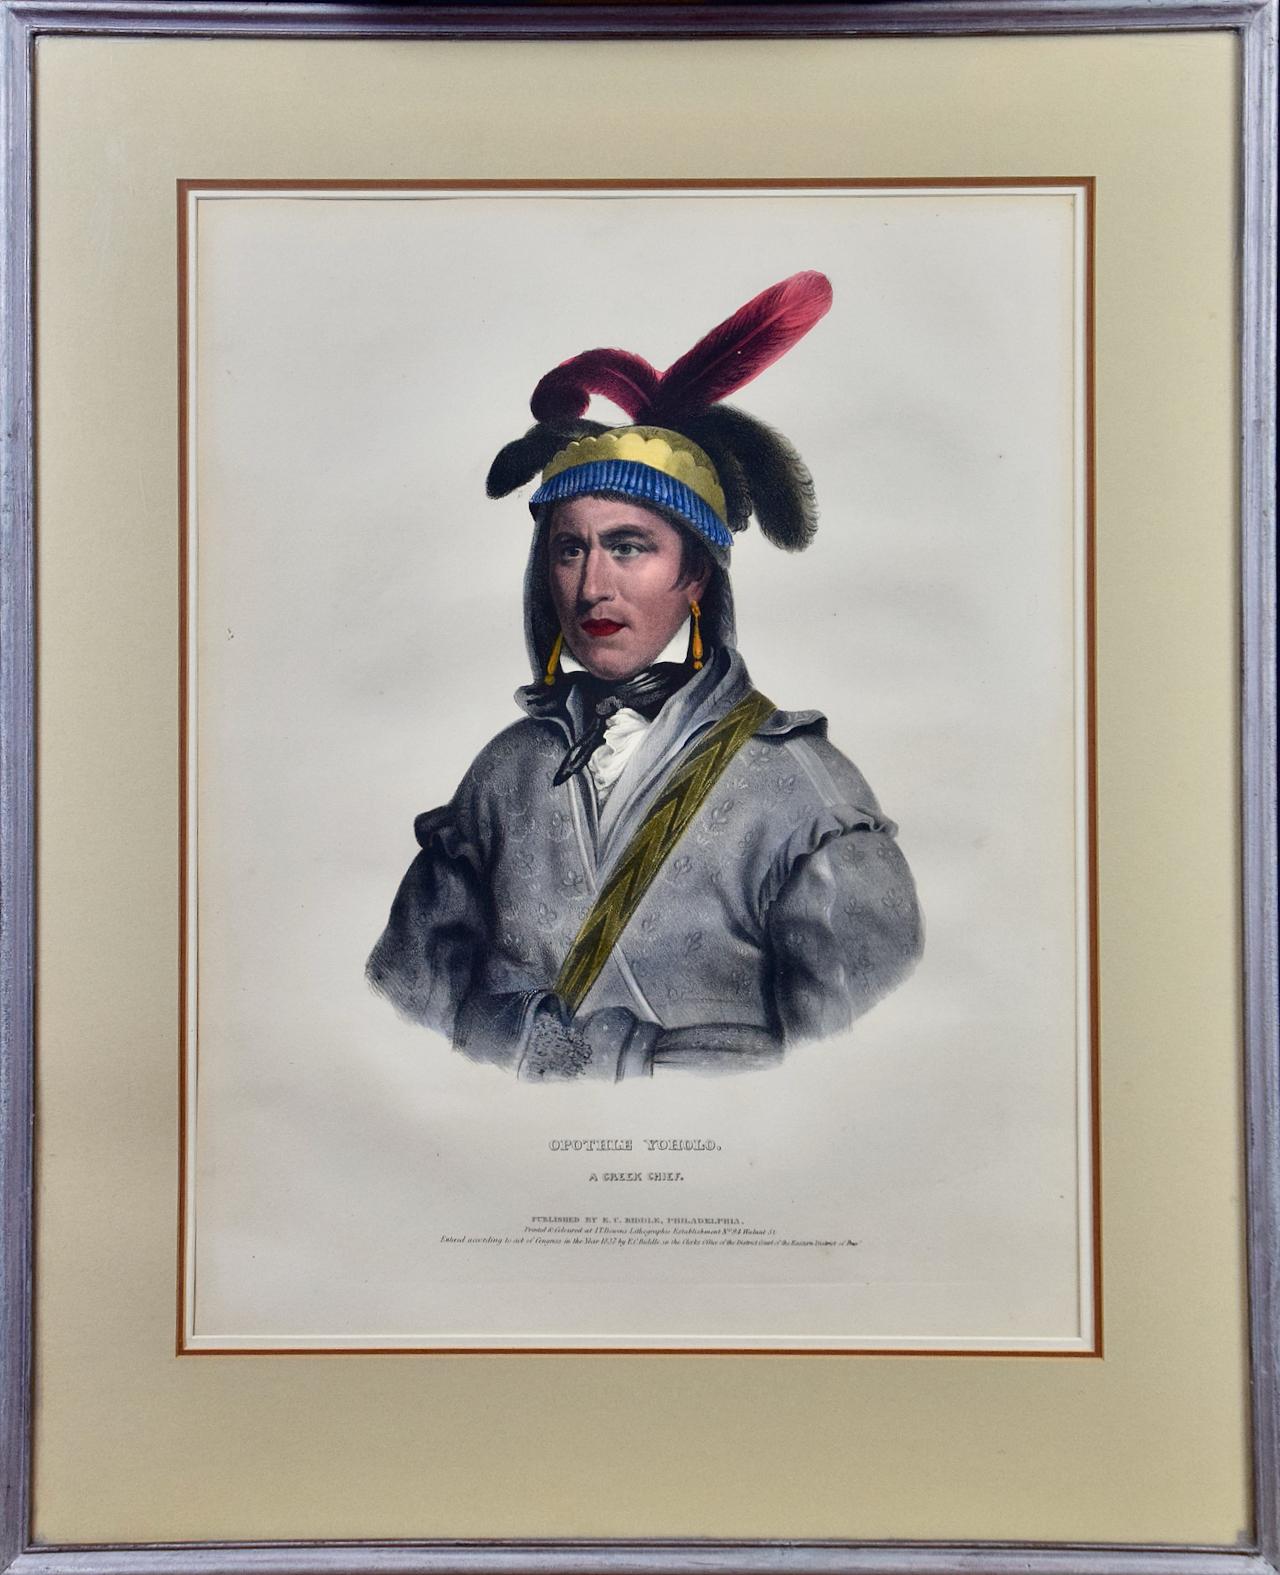 McKenney & Hall Print - Opothe Yoholo, A Creek Chief: Hand-colored McKenney Folio-sized Lithograph